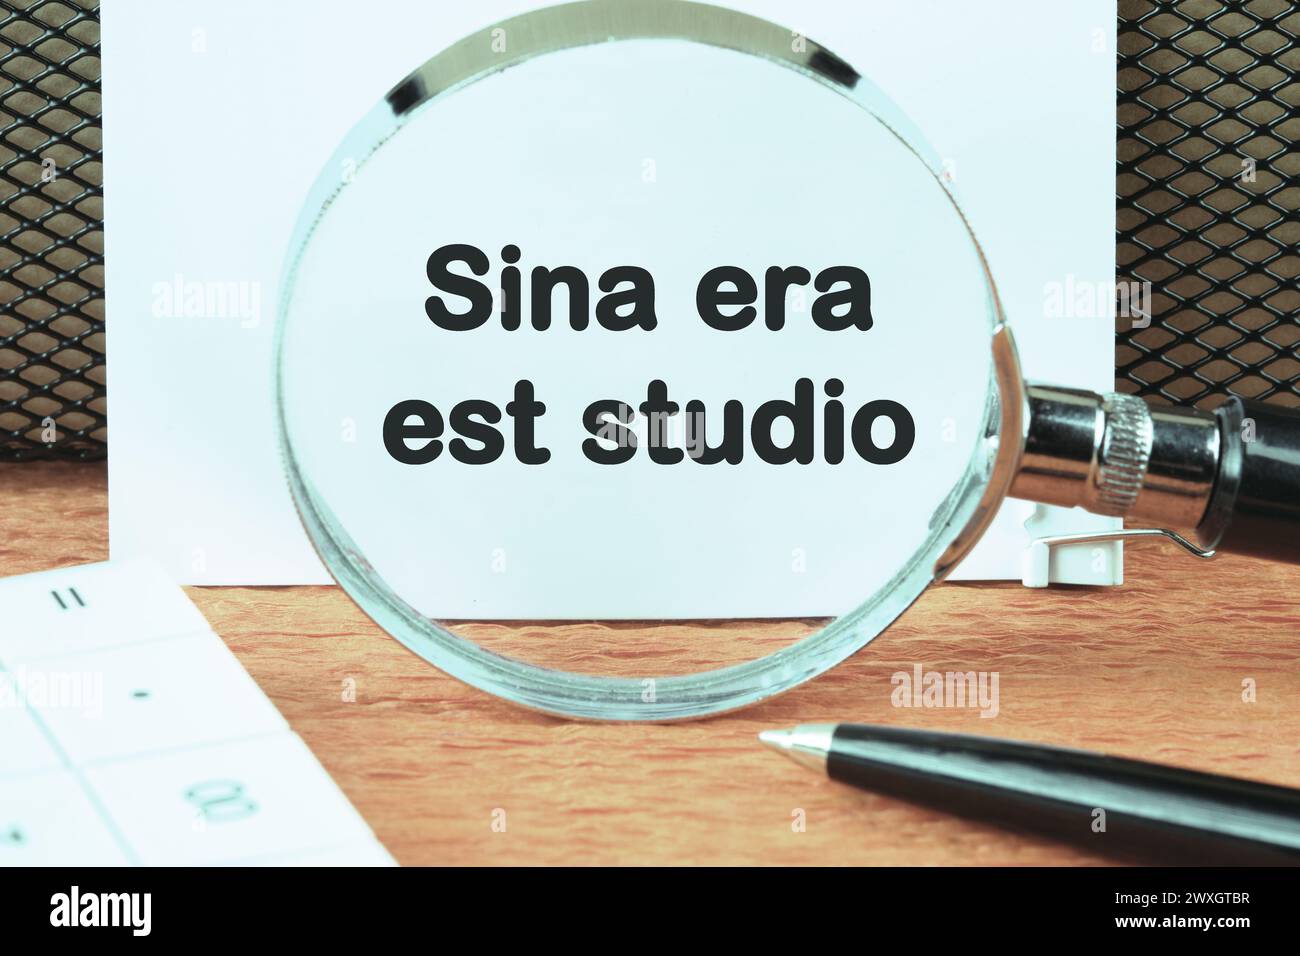 Sina era est studio It means Without anger and addiction an inscription was found using a magnifying glass on a white sheet. Concept photo Stock Photo